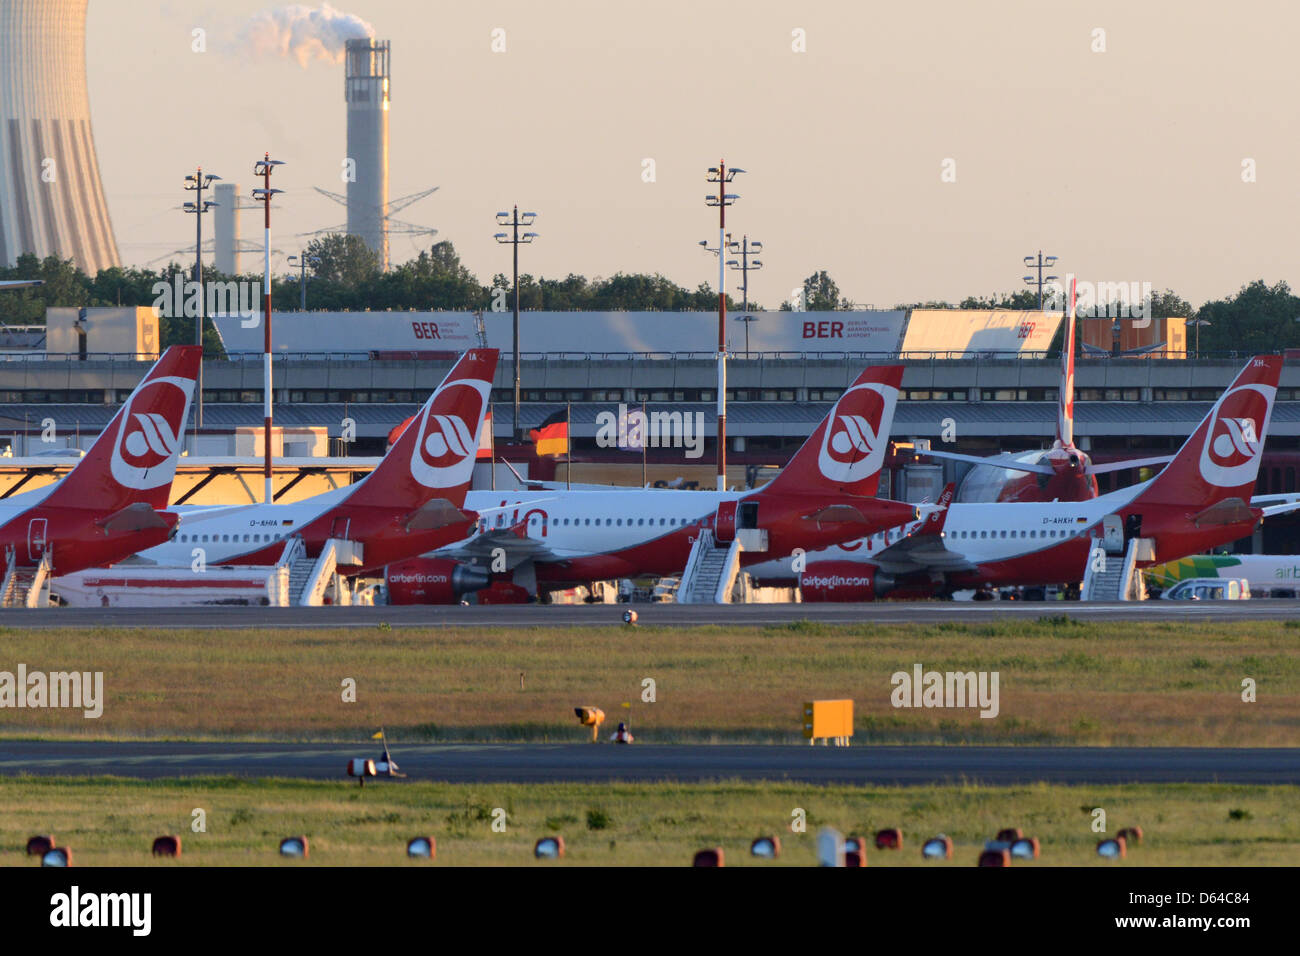 Airplanes in the evening light at Tegel Airport in Berlin, Germany, 24 May 2012. There are discussions about admitting night flights in Tegel after the opening of the new Berlin International Airport (BER) had to be pushed back to 2013. Foto: Matthias Balk dpa/lbn Stock Photo